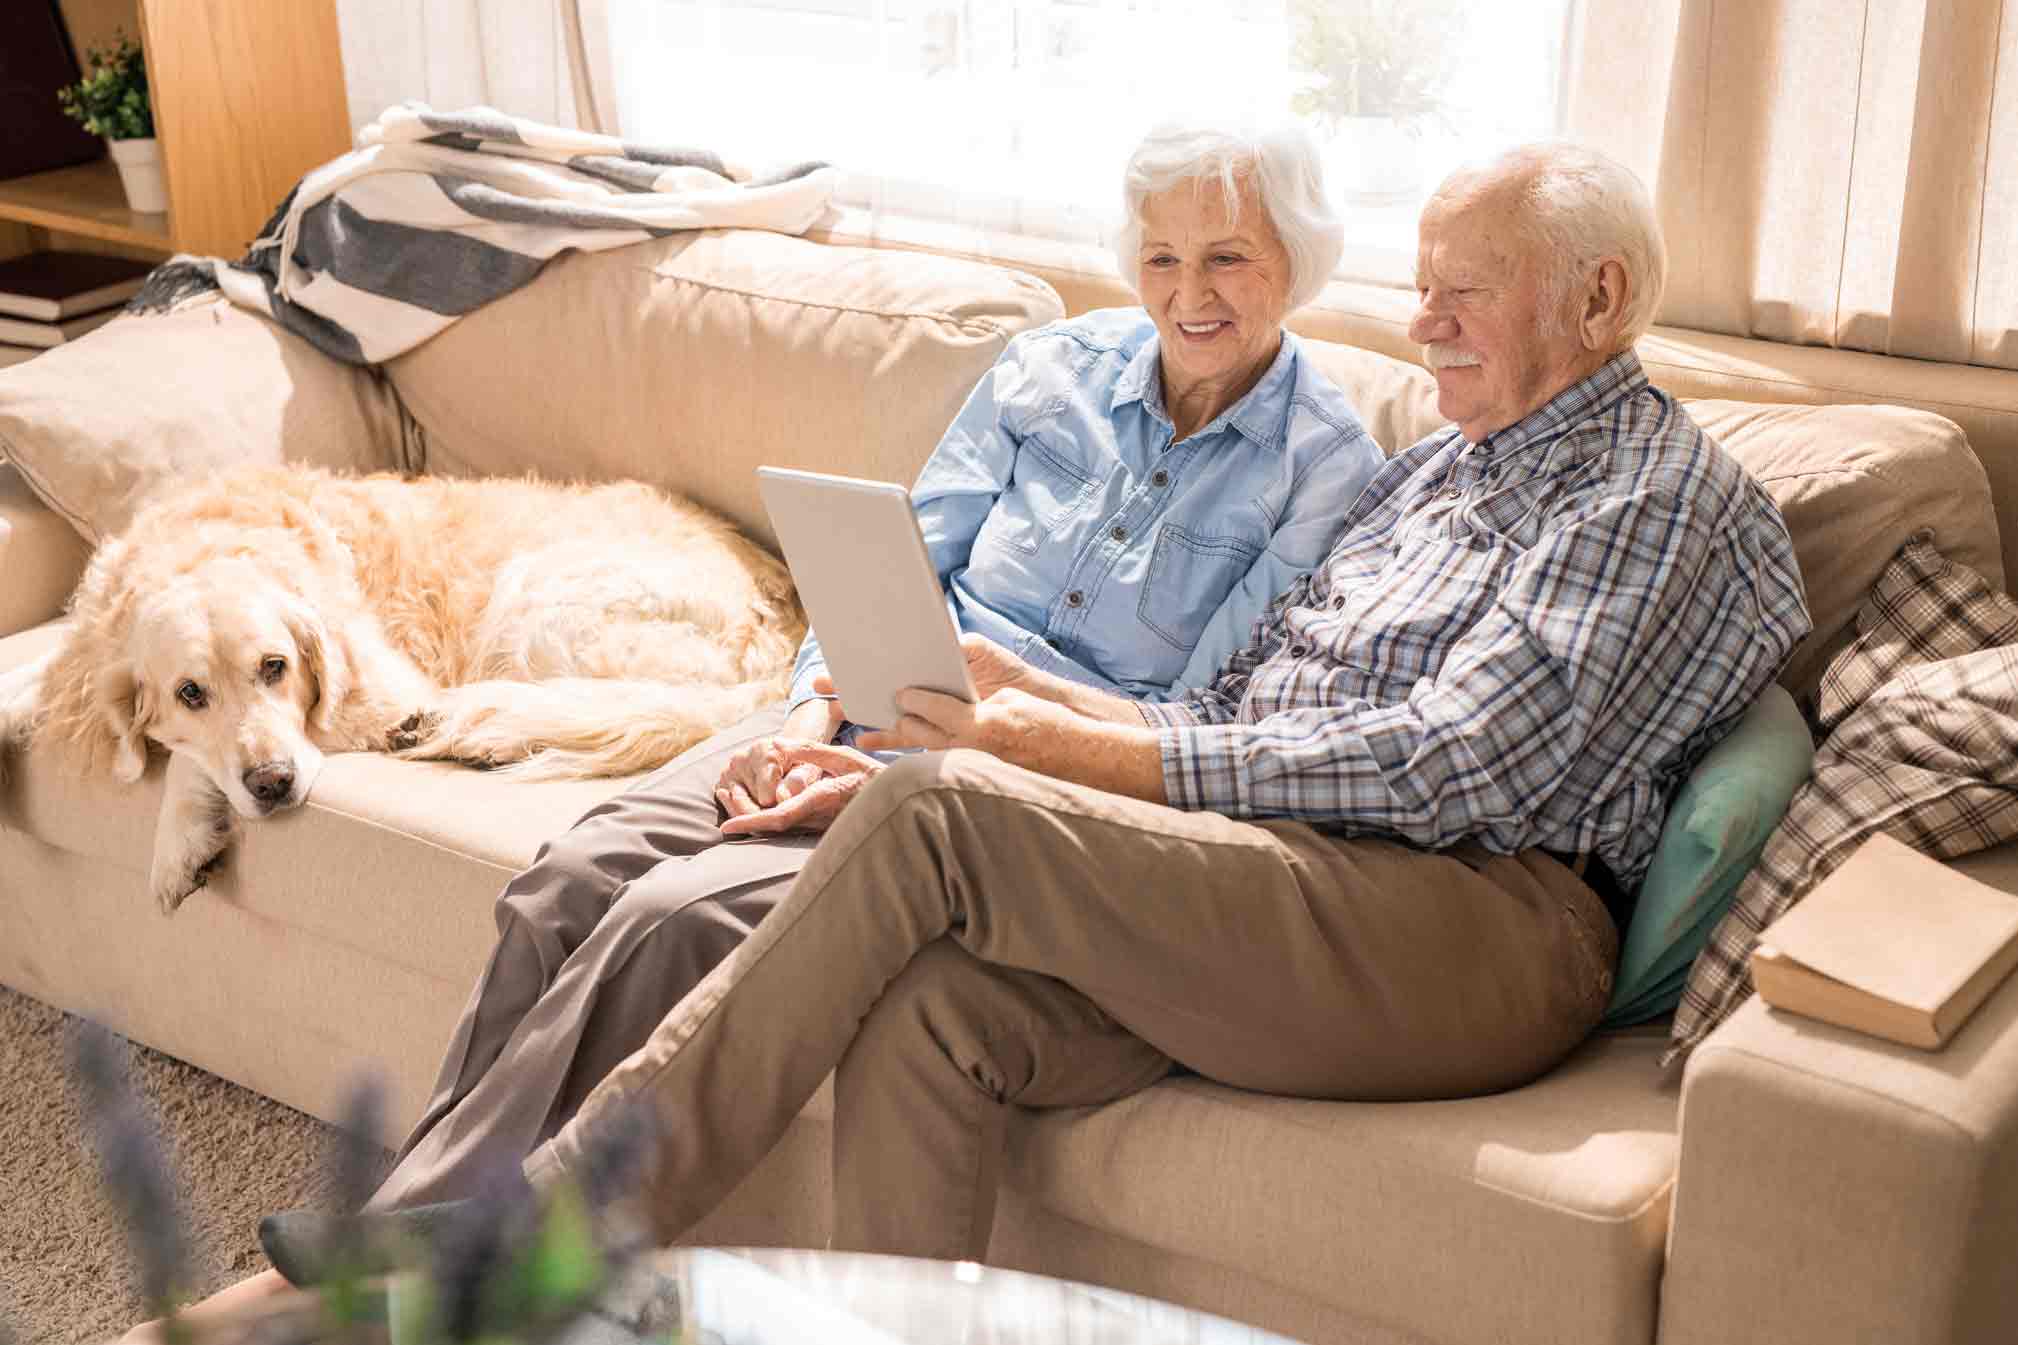 Elderly couple sitting on couch with their dog.